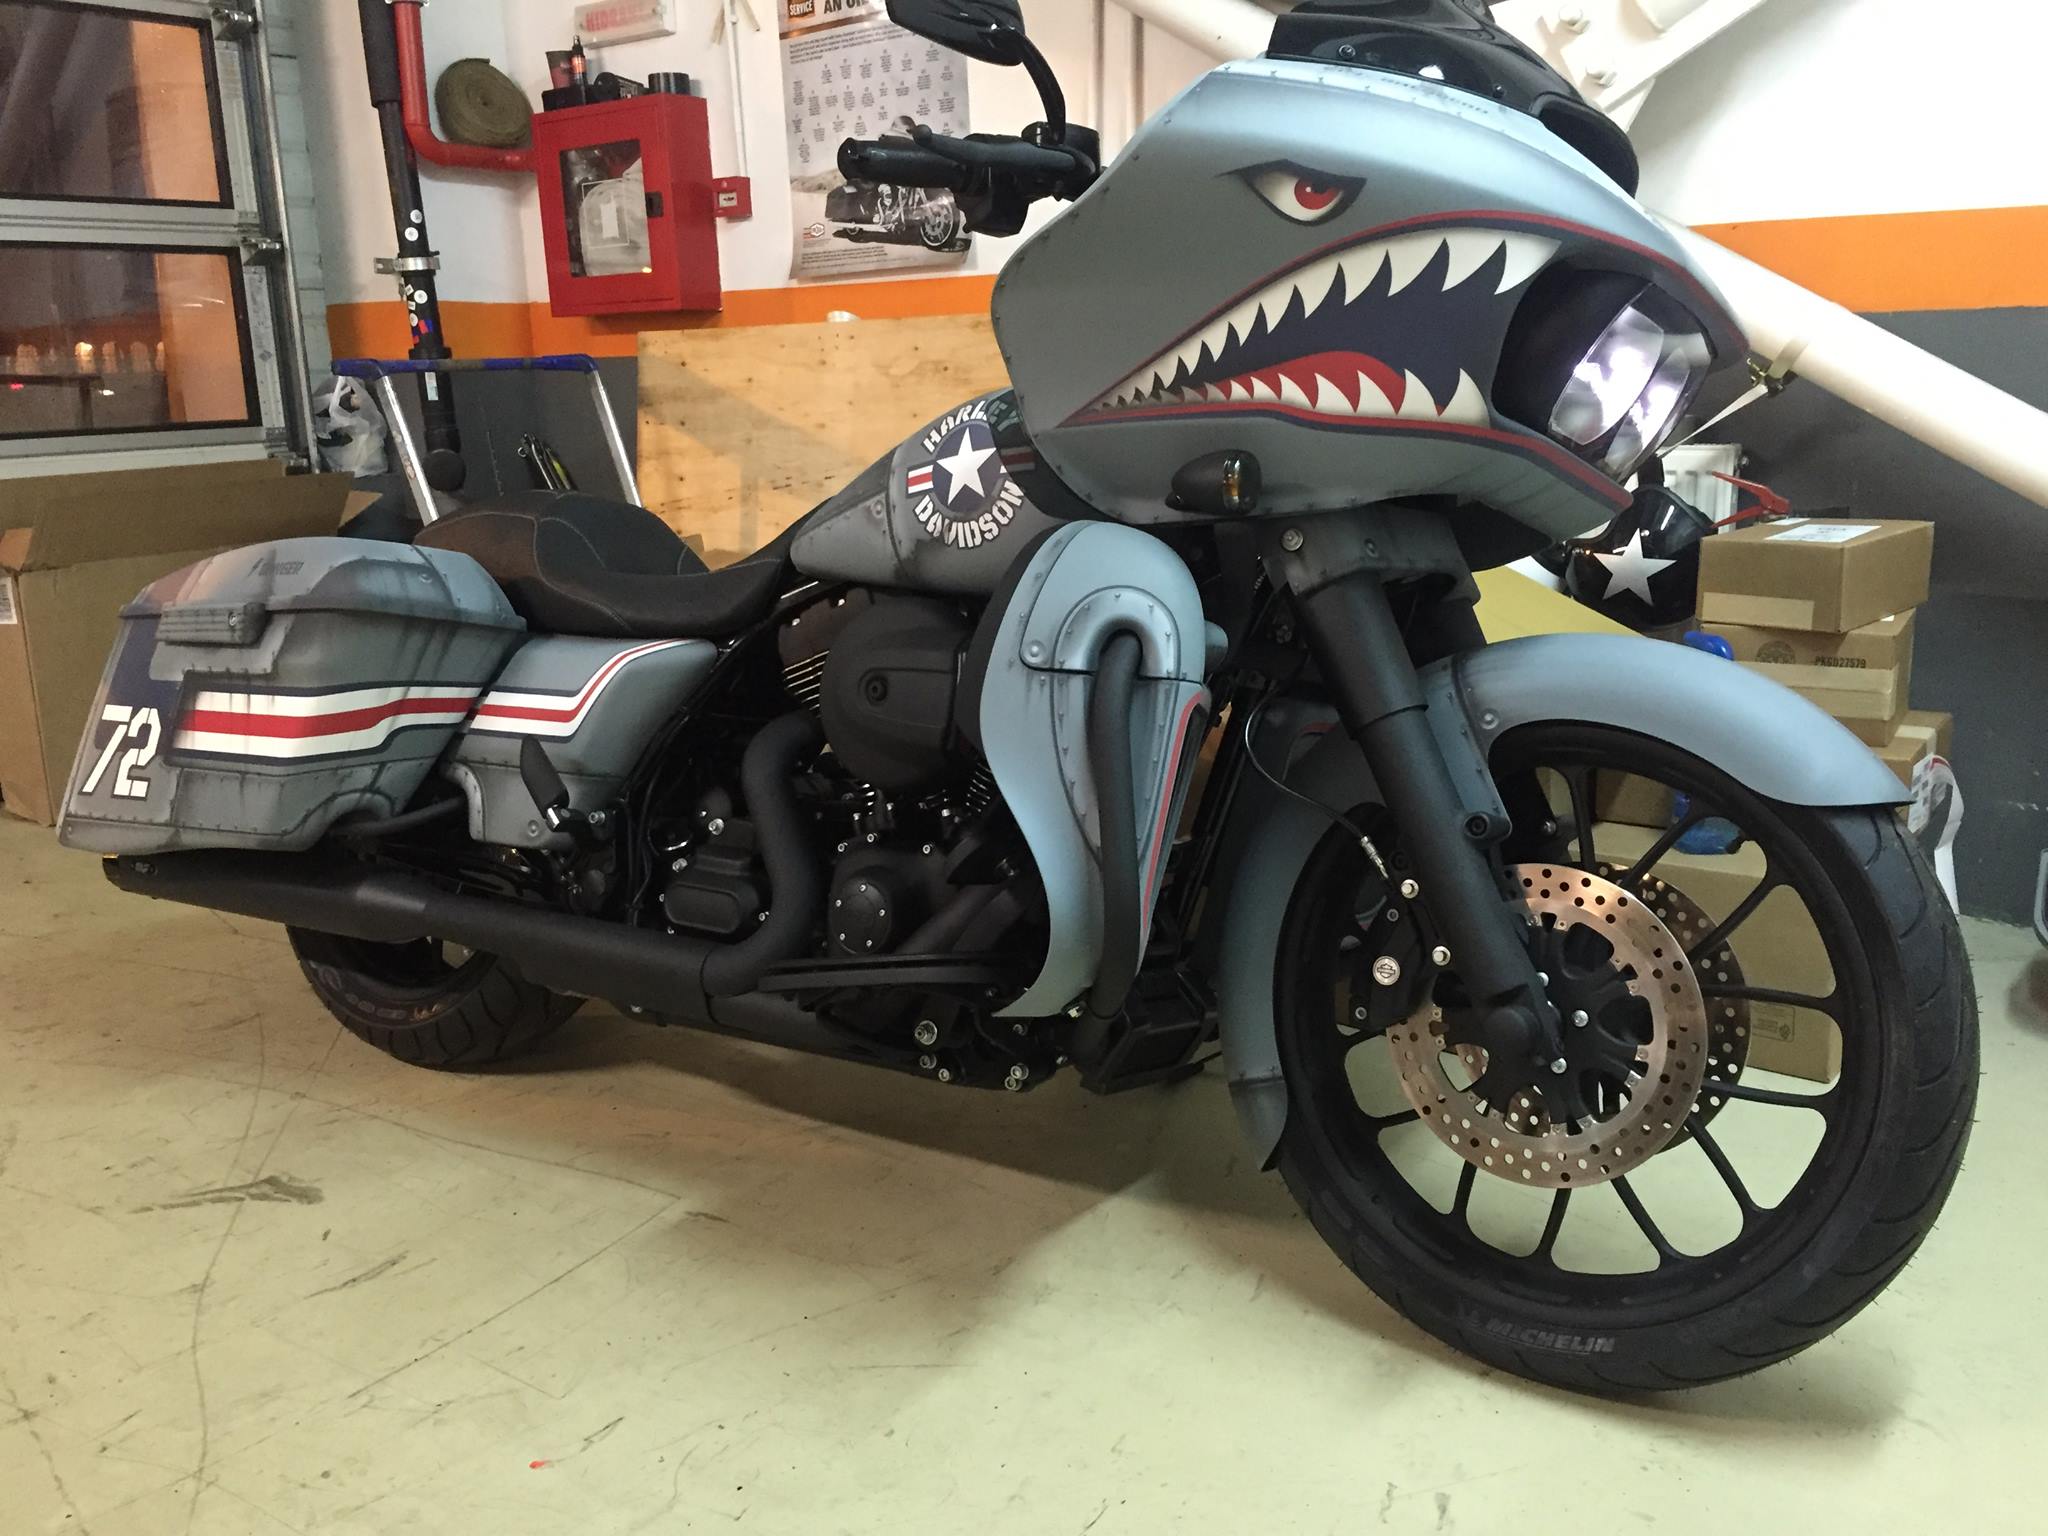 Shark Mouthed Harley-Davidson Road Glide Looks Hungry